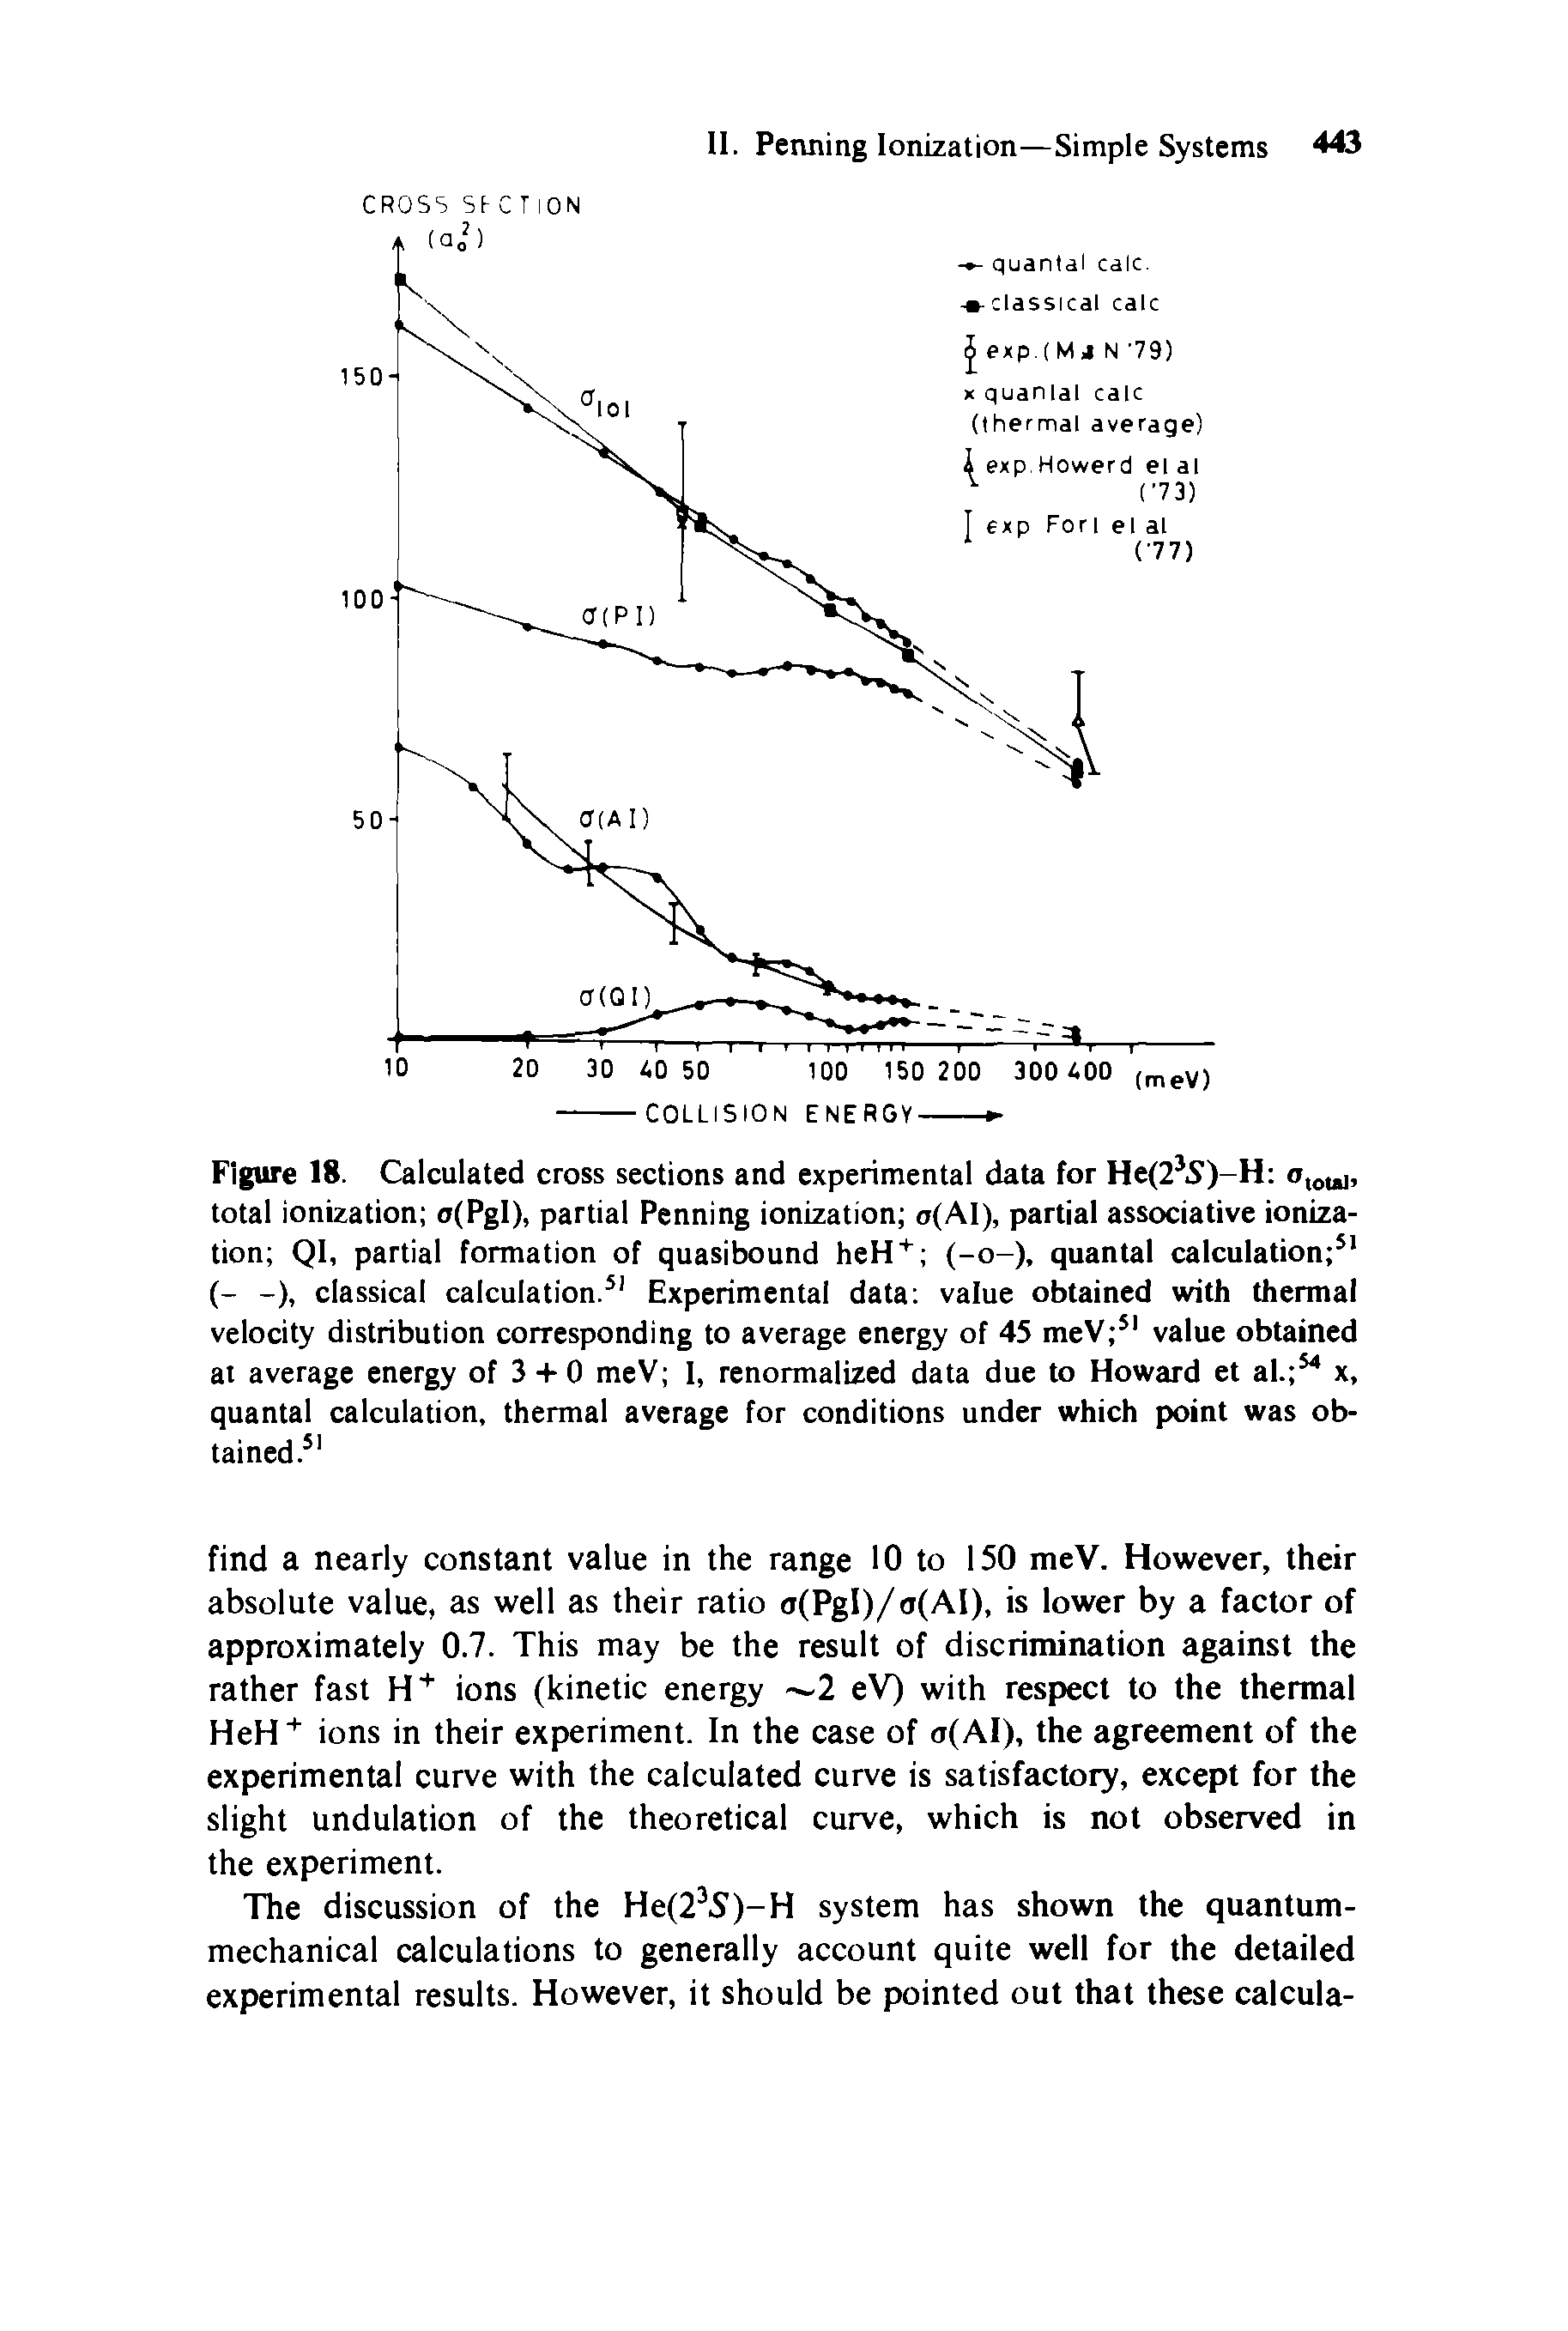 Figure 18. Calculated cross sections and experimental data for He(2J5)-H otouu, total ionization o(Pgl), partial Penning ionization a(AI), partial associative ionization QI, partial formation of quasibound heH + (-o-), quantal calculation 51 (- -), classical calculation.51 Experimental data value obtained with thermal velocity distribution corresponding to average energy of 45 meV 51 value obtained at average energy of 3 + 0 meV I, renormalized data due to Howard et al. 54 x, quantal calculation, thermal average for conditions under which point was obtained.51...